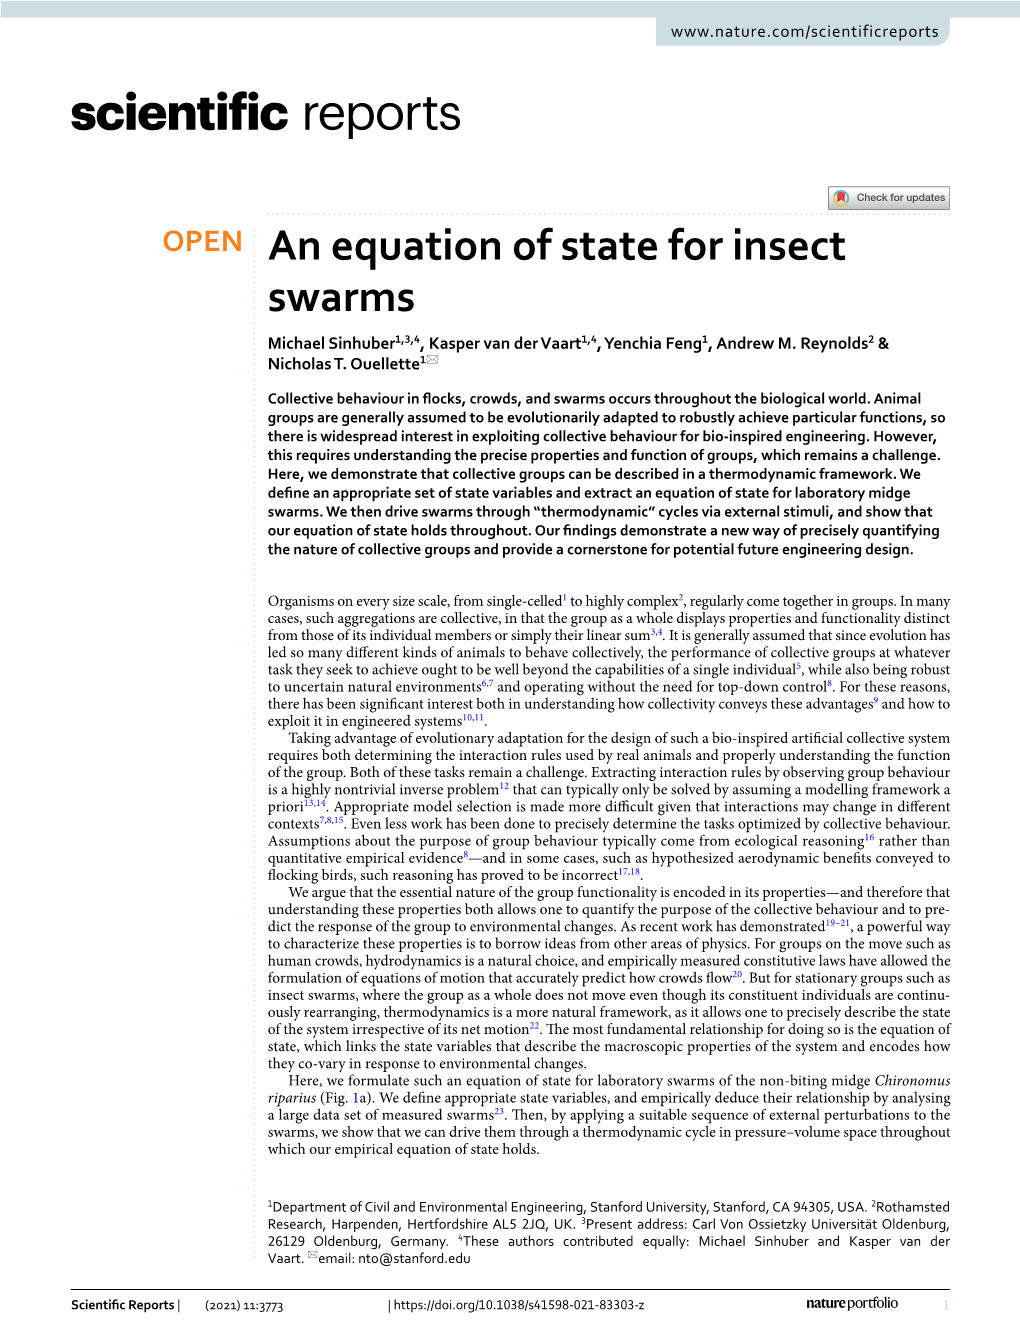 An Equation of State for Insect Swarms Michael Sinhuber1,3,4, Kasper Van Der Vaart1,4, Yenchia Feng1, Andrew M